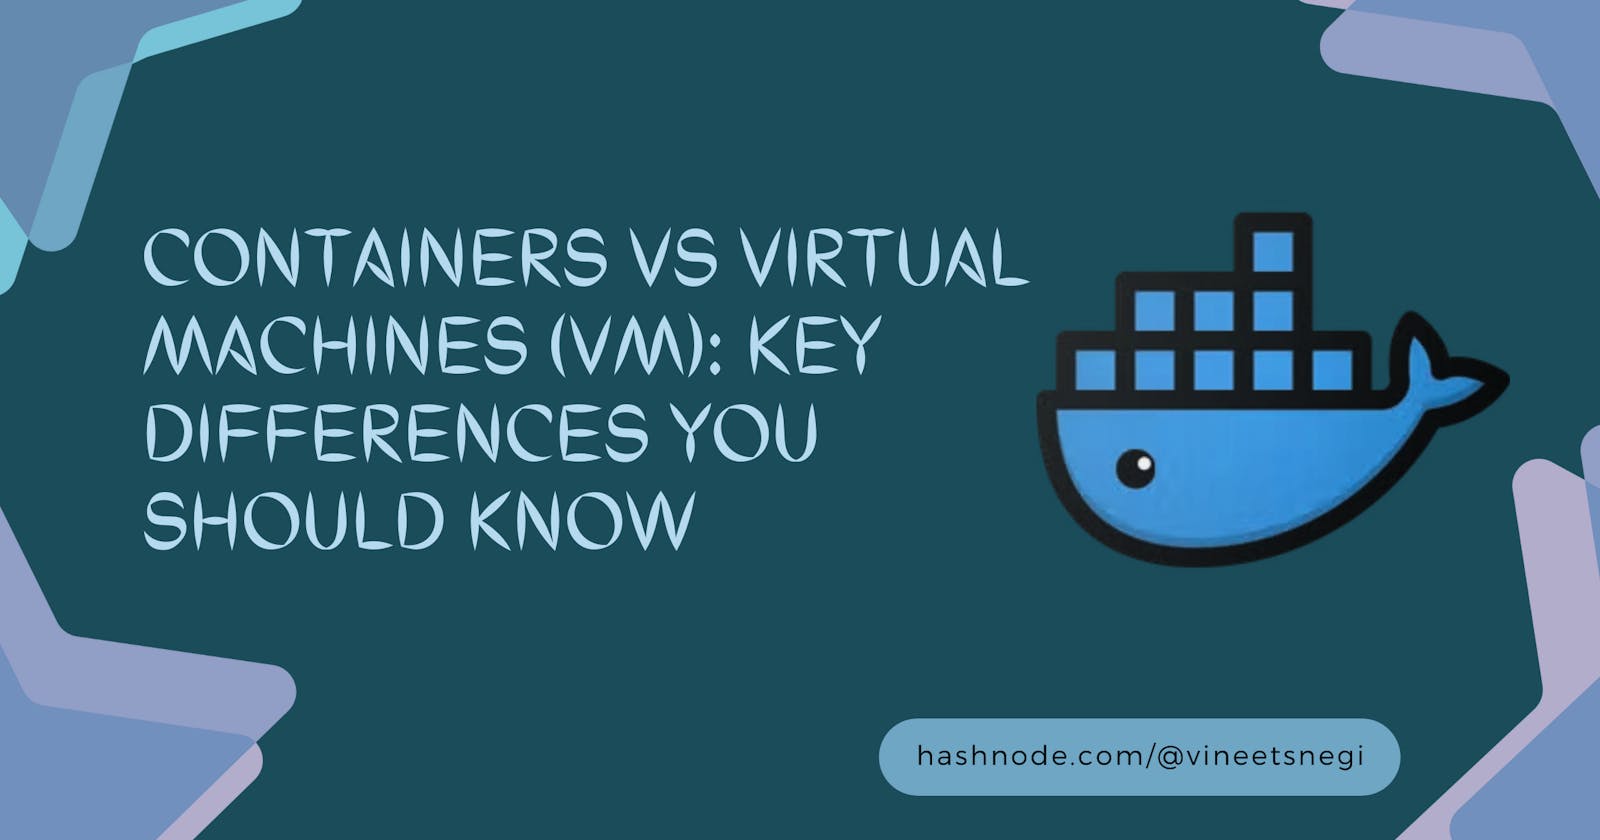 Containers vs Virtual Machines (VM): Key Differences You Should Know